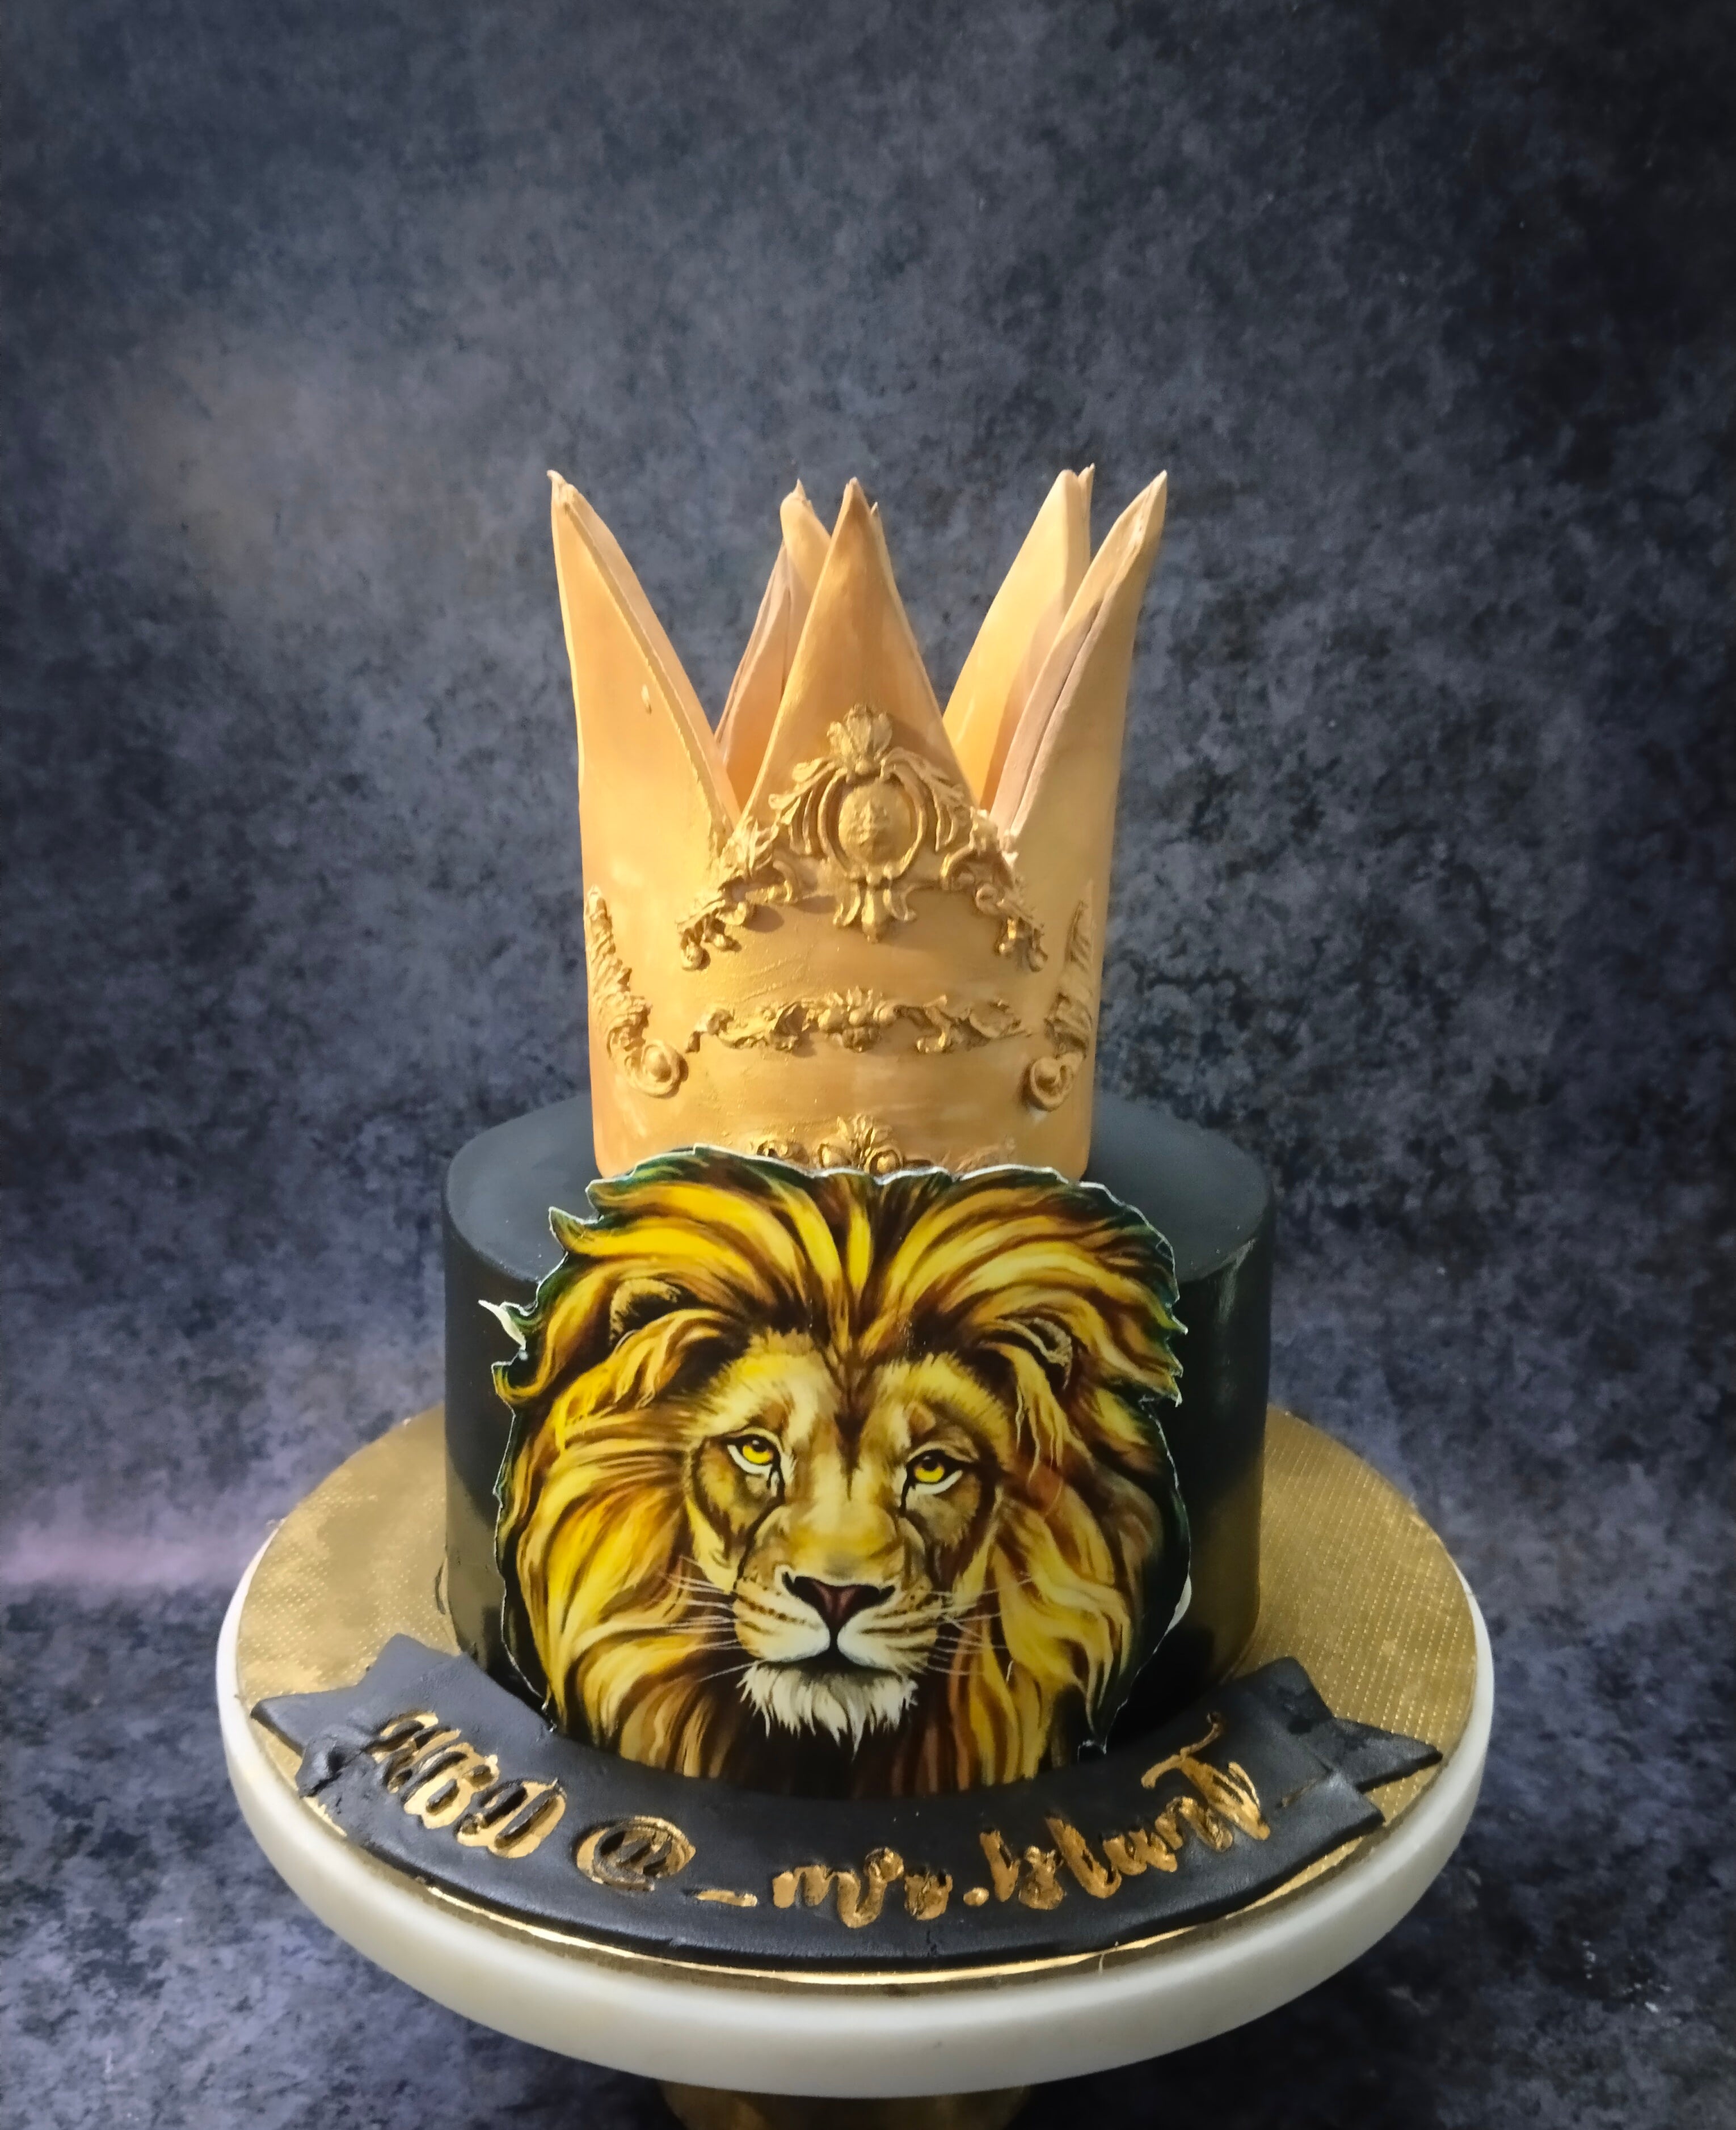 Amazon.com: 49PCS Lion King Cake Decorations with 1pcs Cake Topper, 24pcs  Cupcake Toppers and 24pcs Wrappers for Lion King Birthday Party Supplies :  Grocery & Gourmet Food